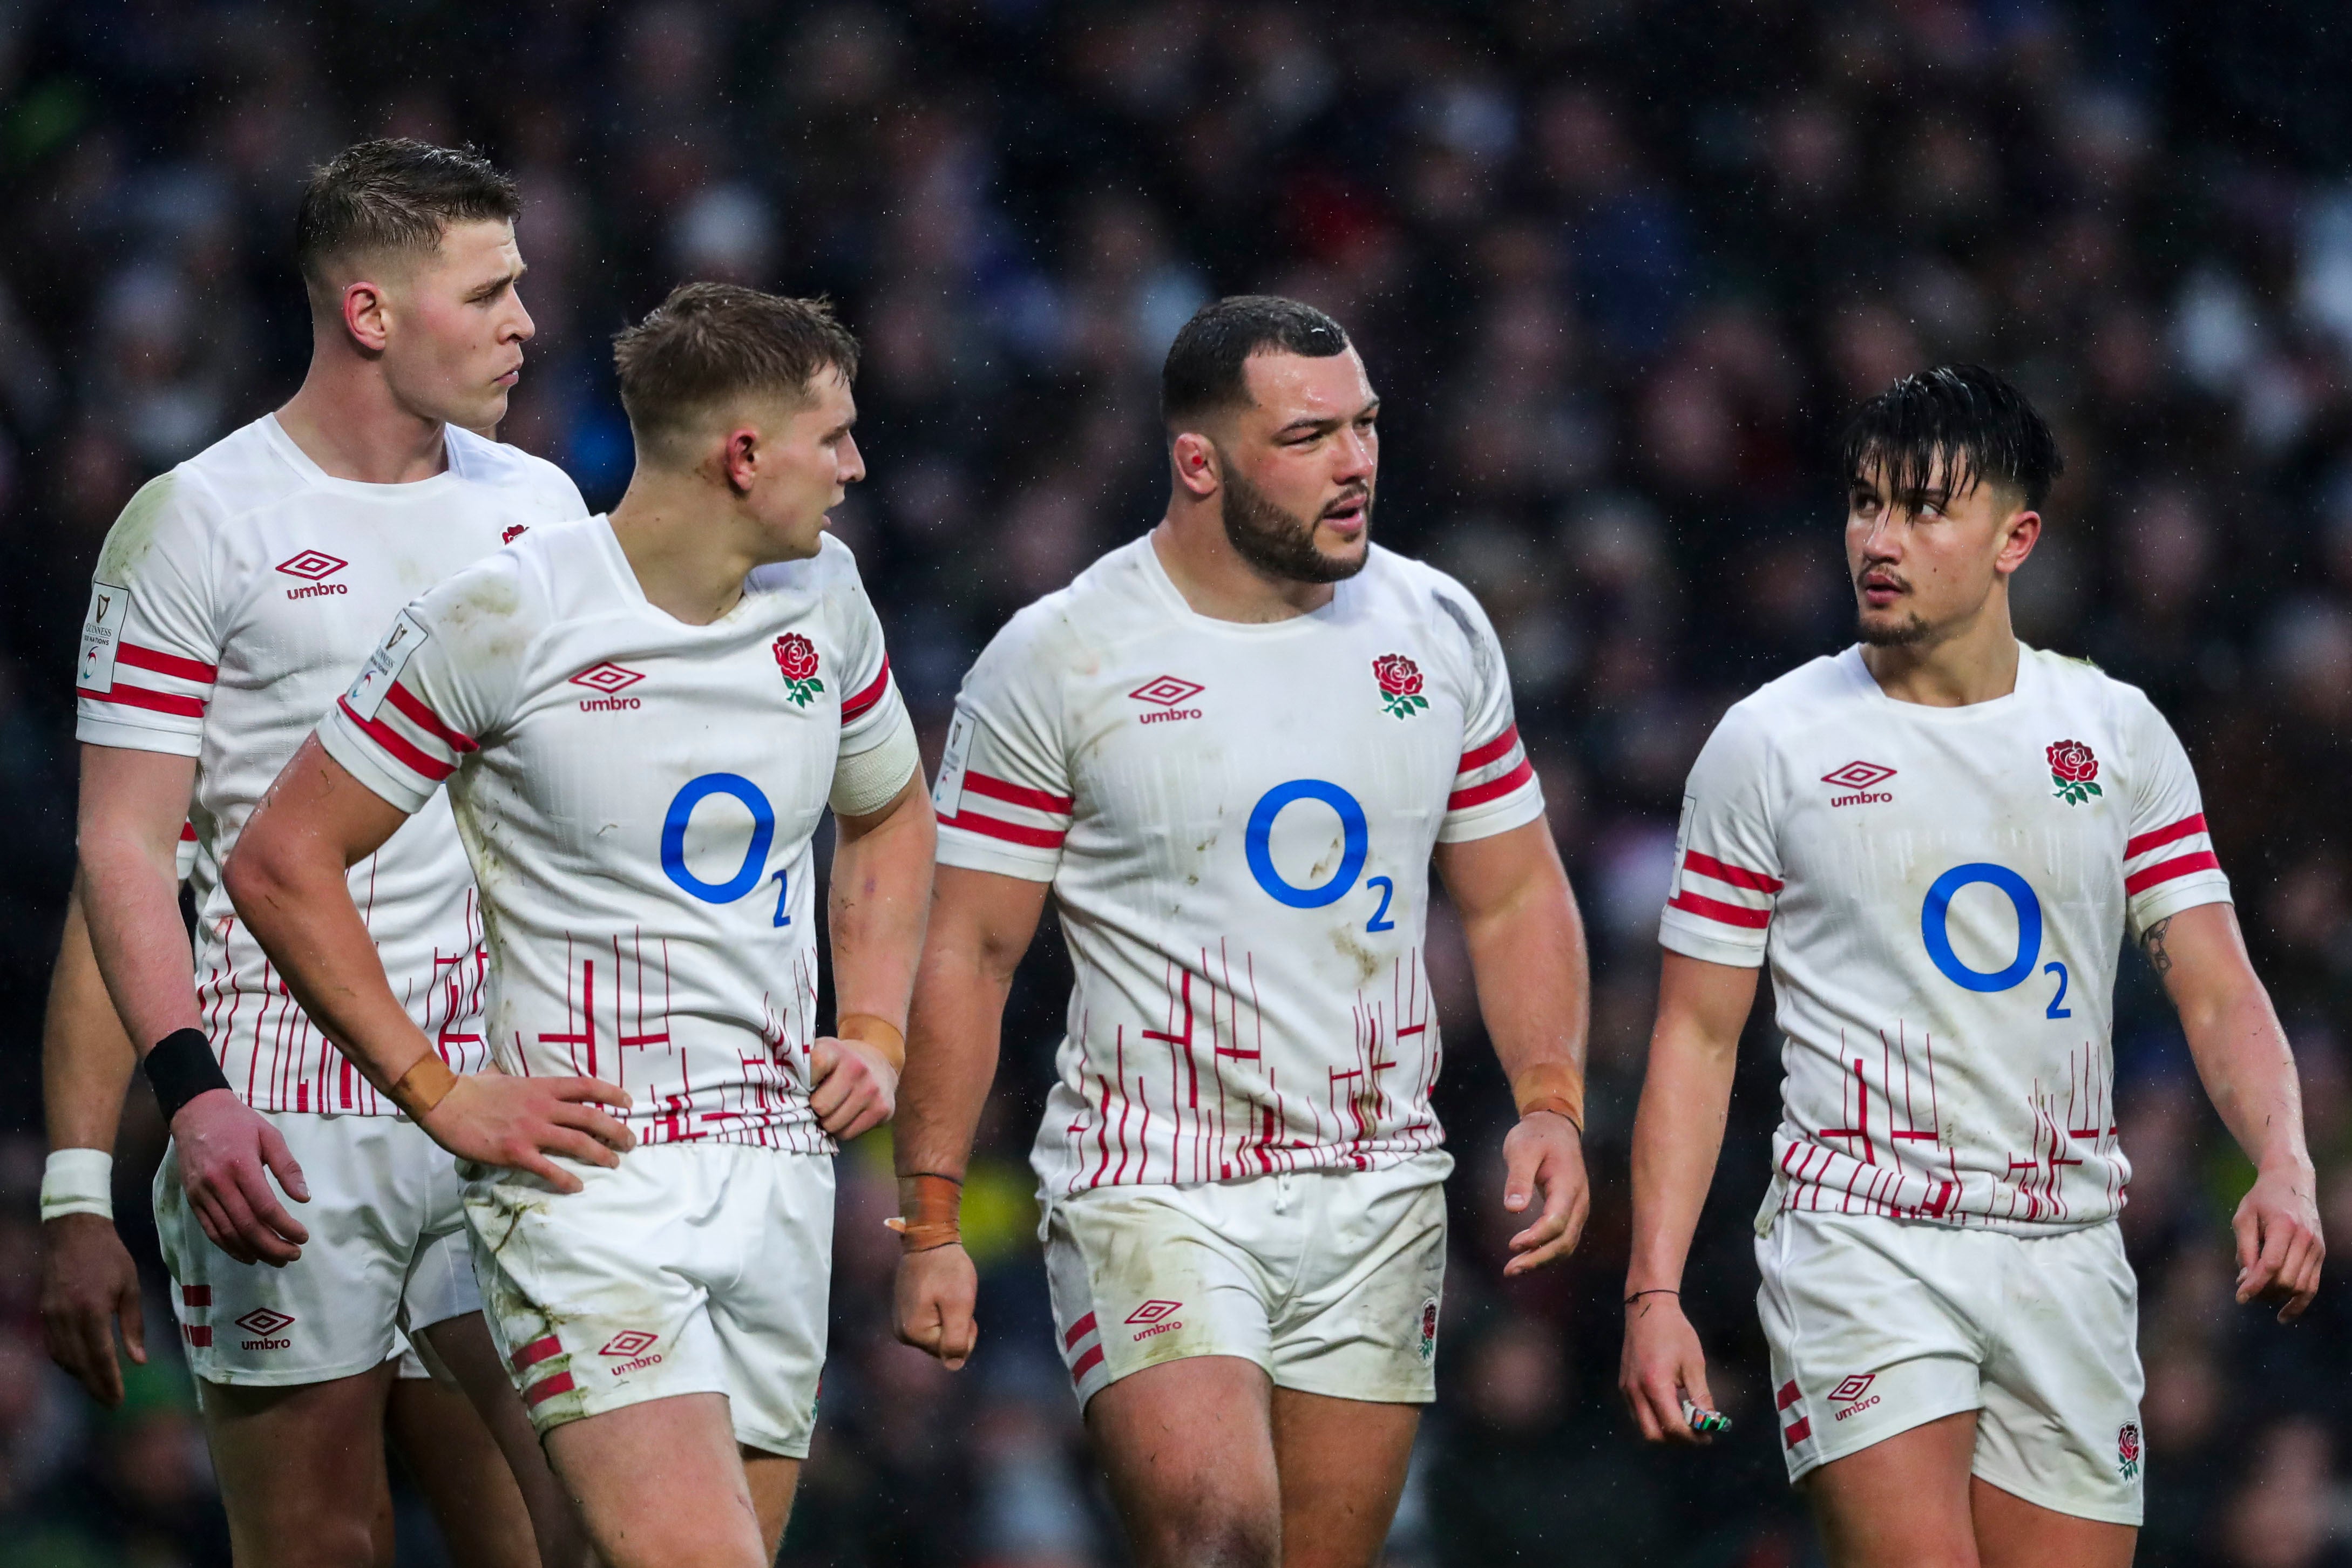 Ellis Genge captained England for the first time last weekend